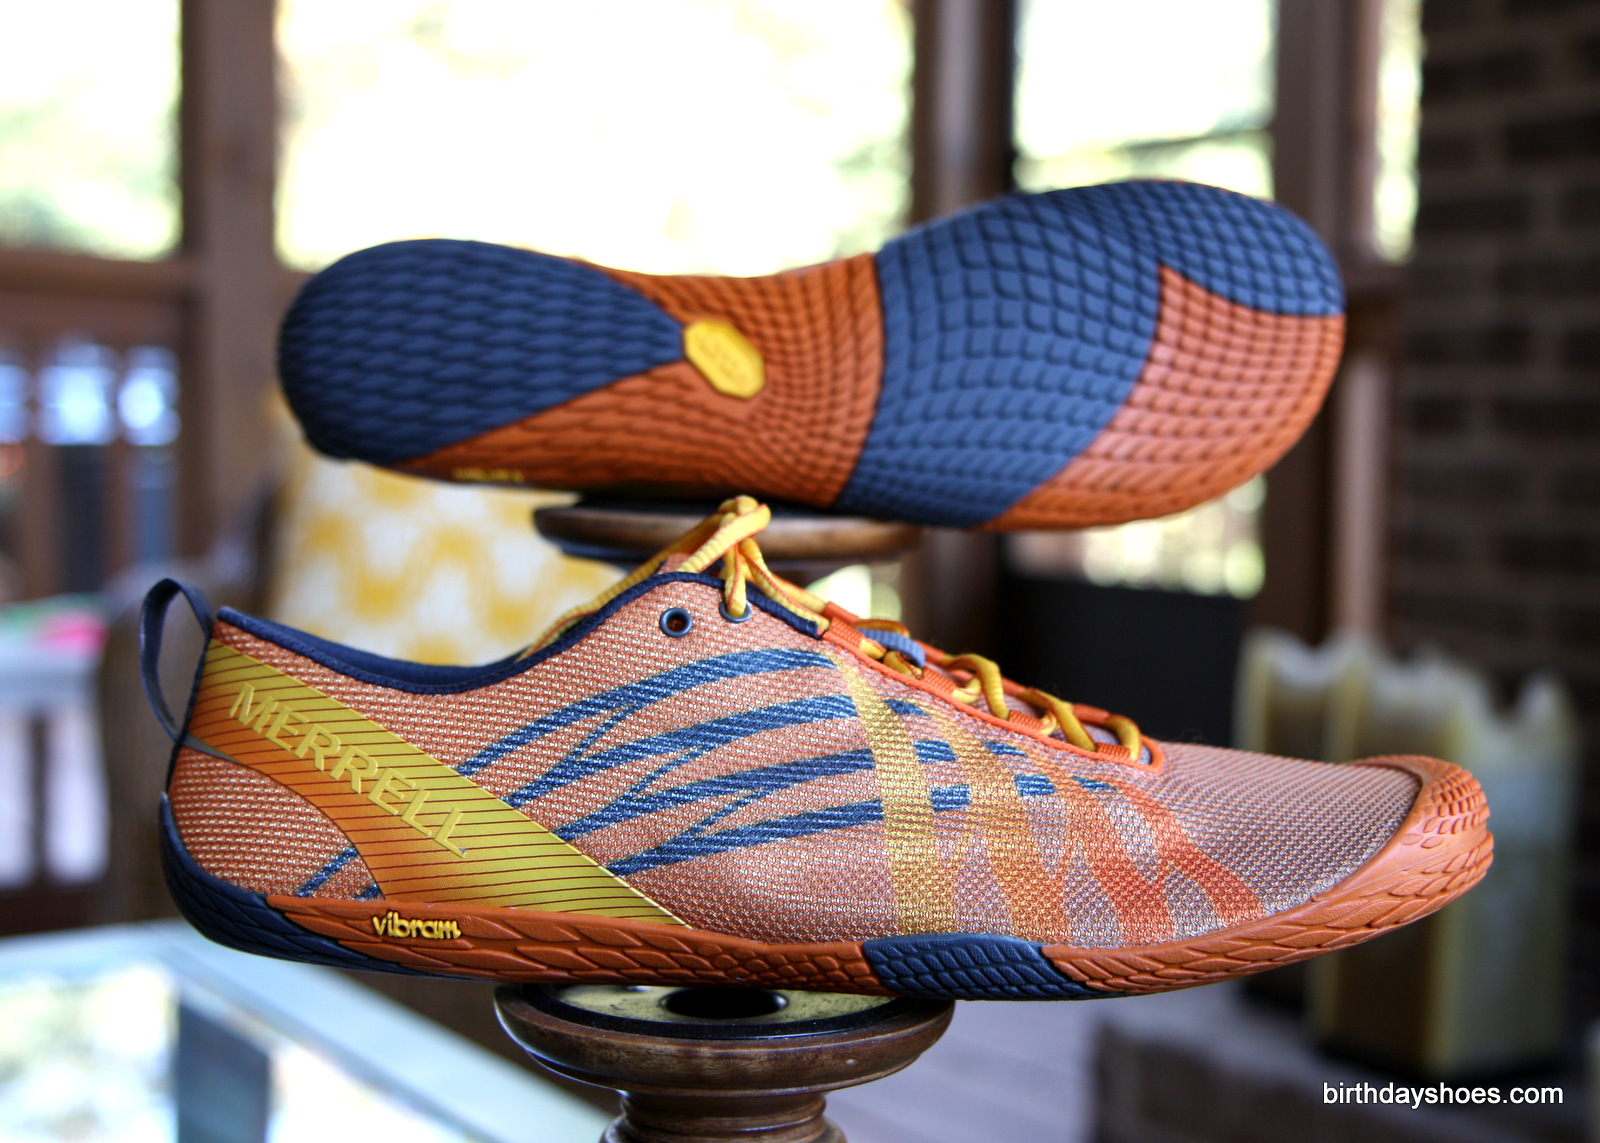 Quilt Vær tilfreds omgive Vapor Glove Merrell Barefoot Initial Review - Birthday Shoes - Toe Shoes,  Barefoot or Minimalist Shoes, and Vibram FiveFingers Reviews, News, Forums